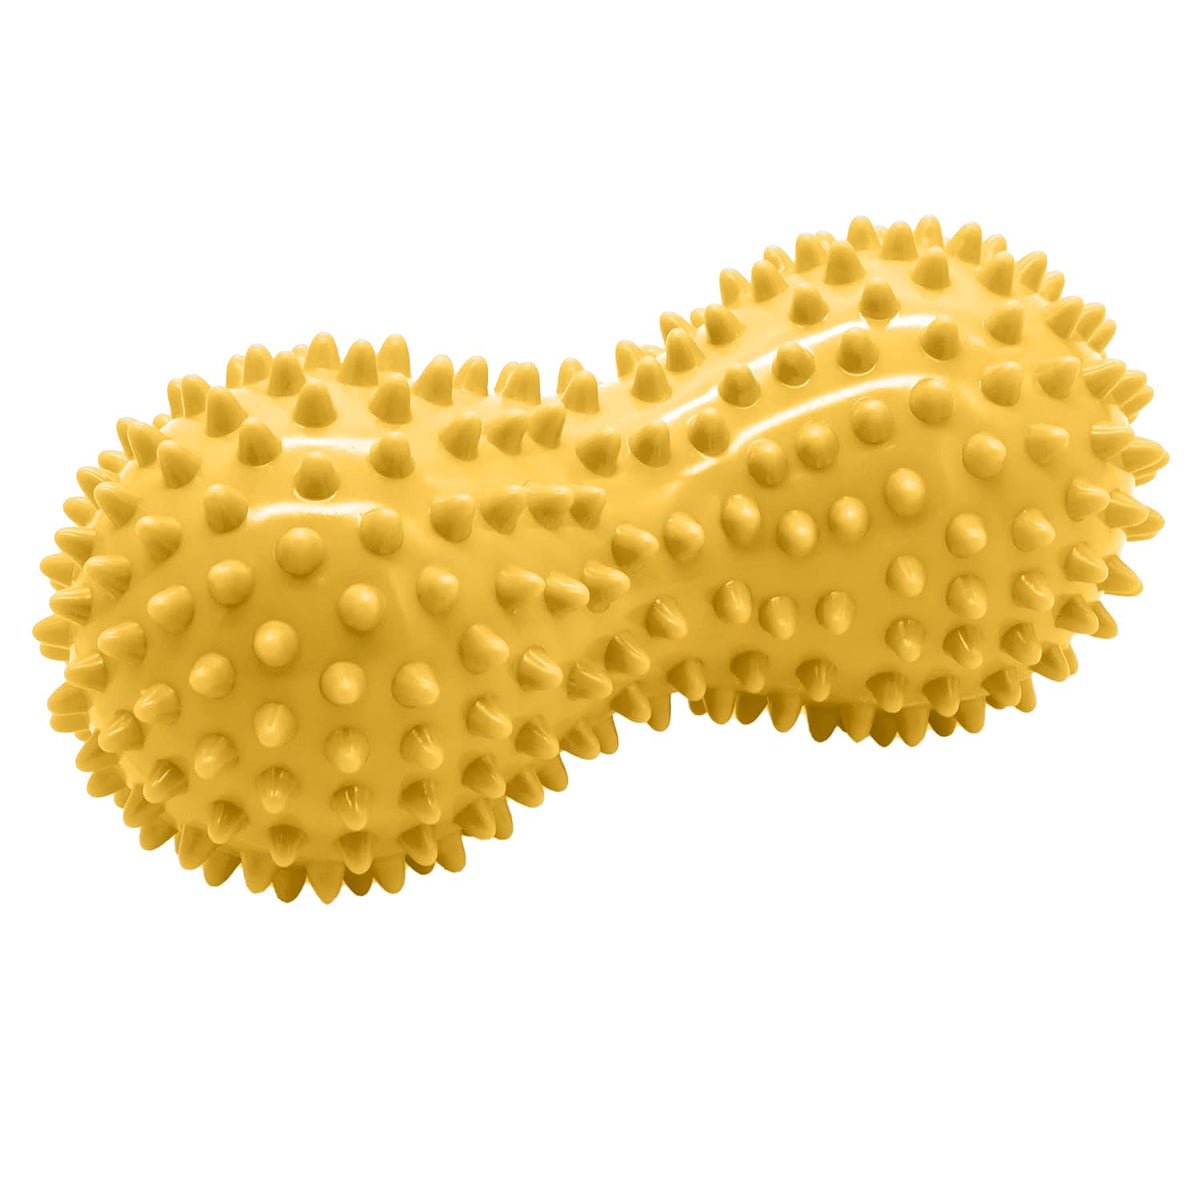 Strauss Massage Lacrosse Ball | Peanut Spiky Massage Ball | Ideal For Massage on Foot, Back, Shoulder | All Over Body Deep Tissue Muscle Therapy For Strength, (Yellow)